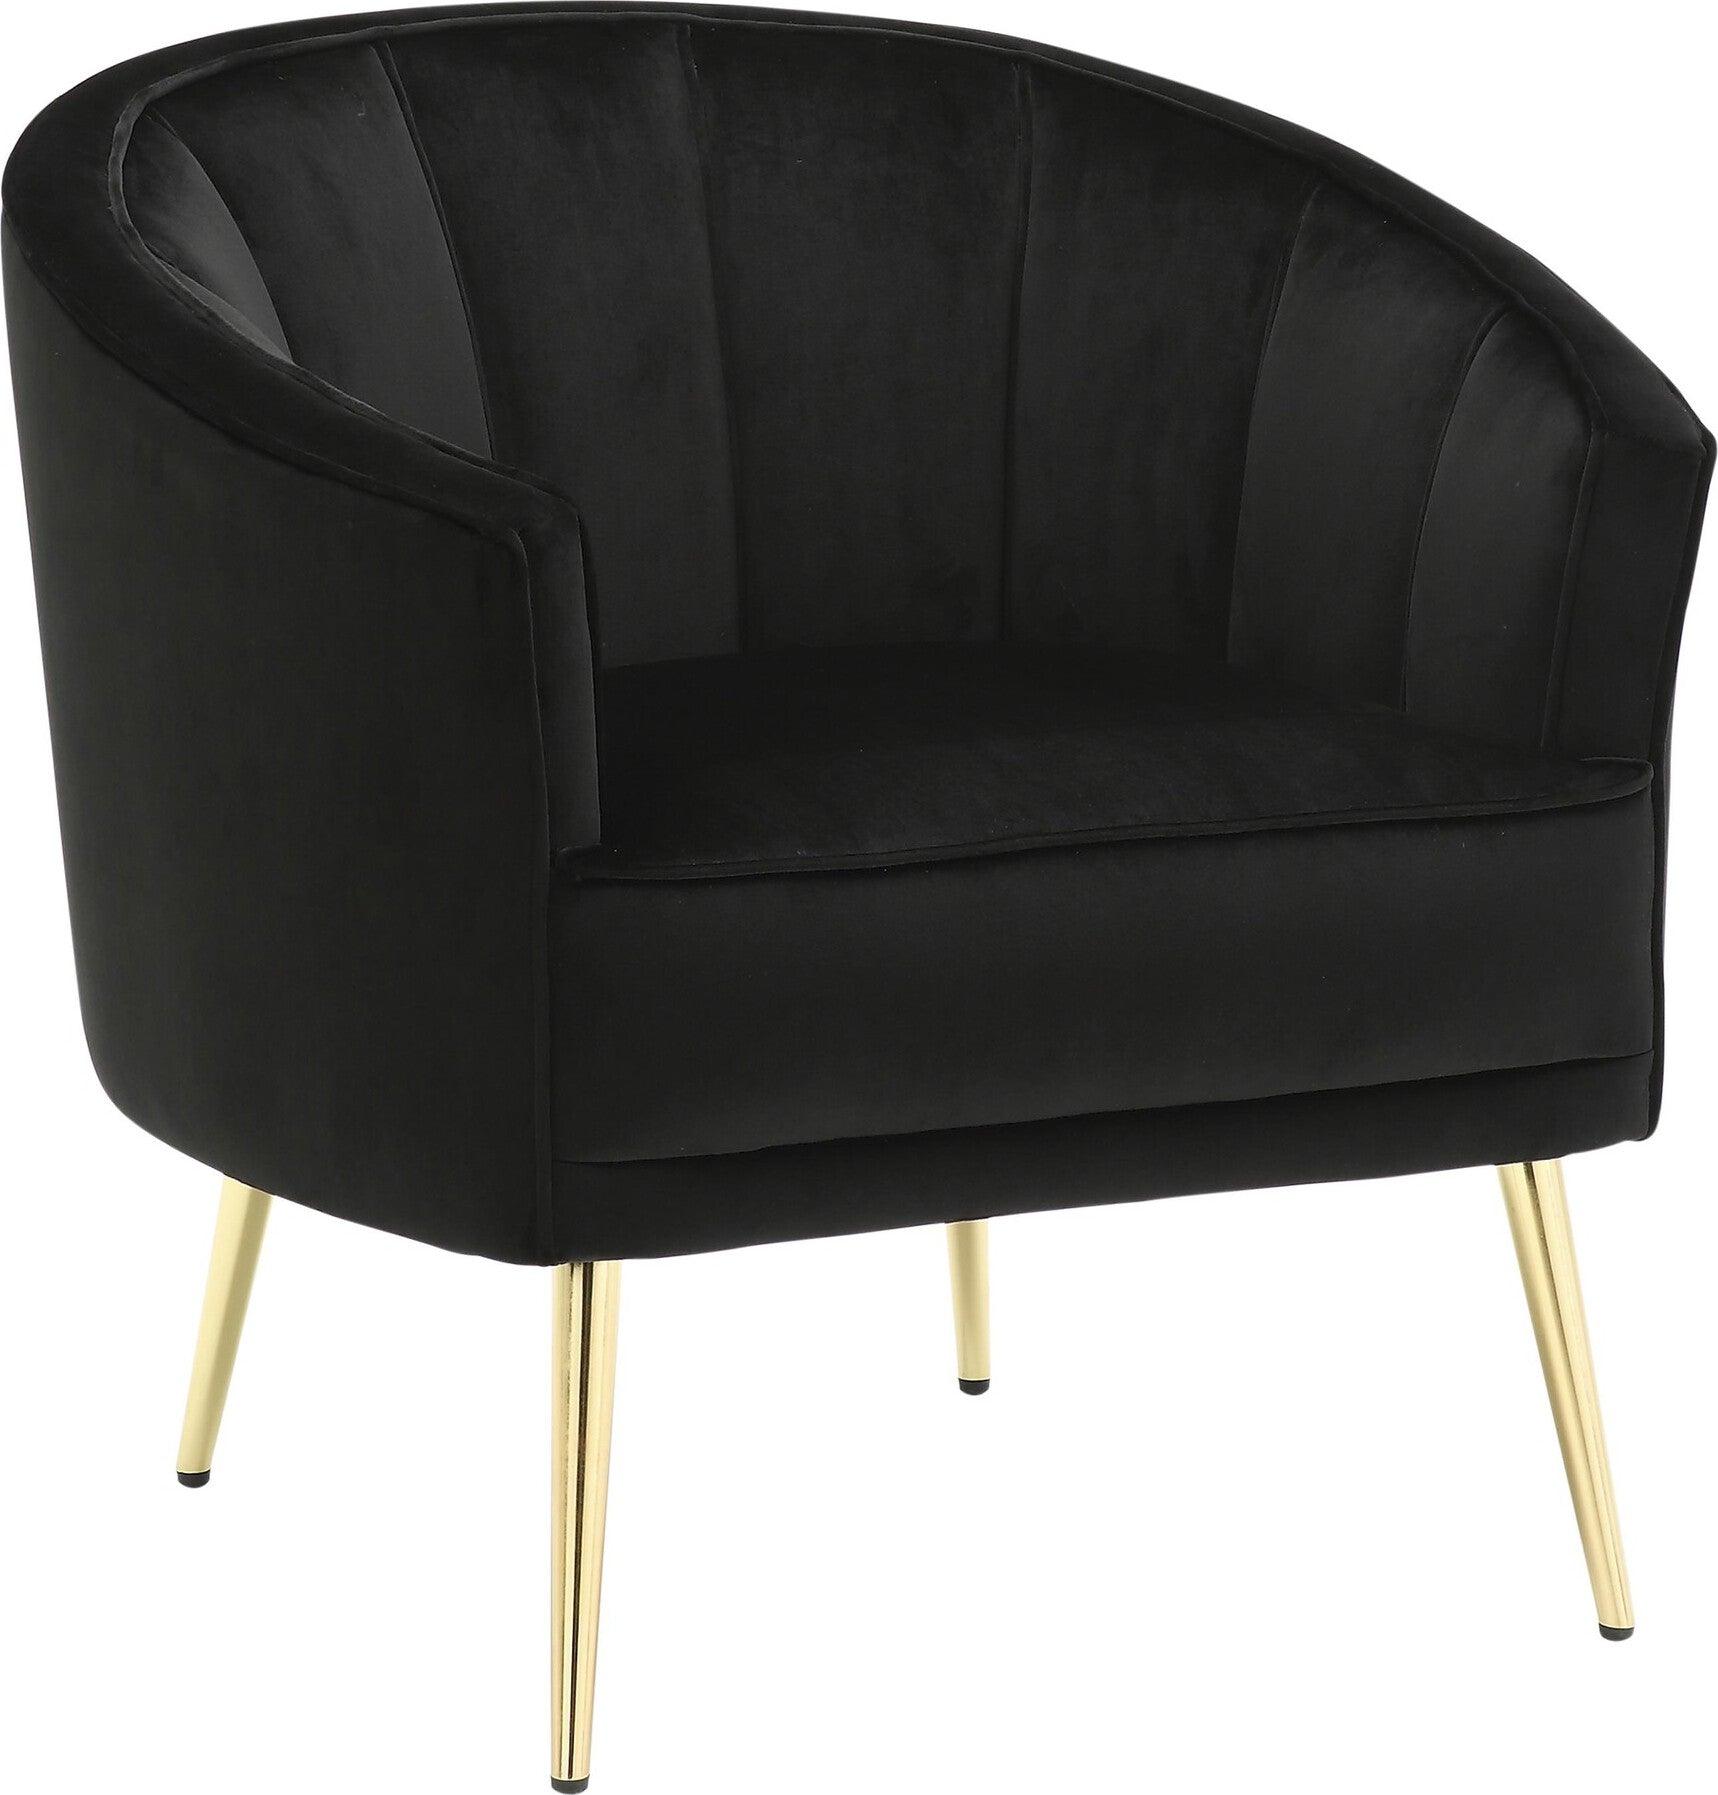 Lumisource Accent Chairs - Tania Accent Chair Gold & Black